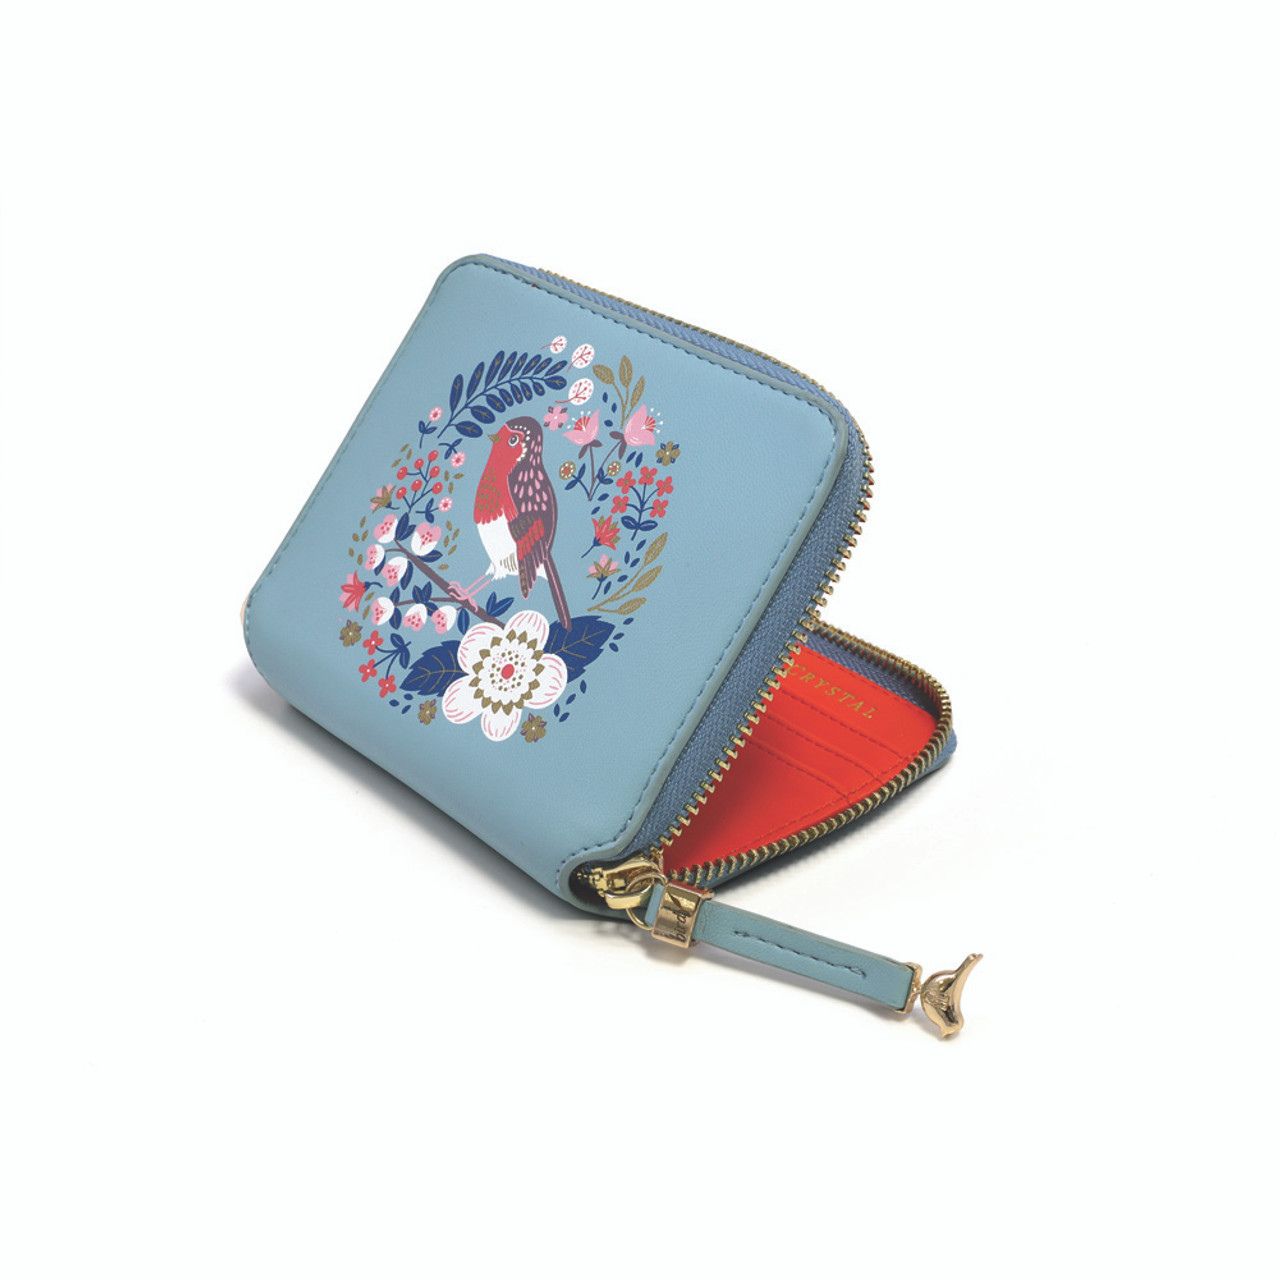 Tipperary Crystal Robin Birdy Wallet  Our brightly coloured Birdy wallets are a perfectly compact ladies wallet. Designed to bring a splash of colour into your life! RFID blocking wallet, designed to block RFID readers from scanning your credit cards.